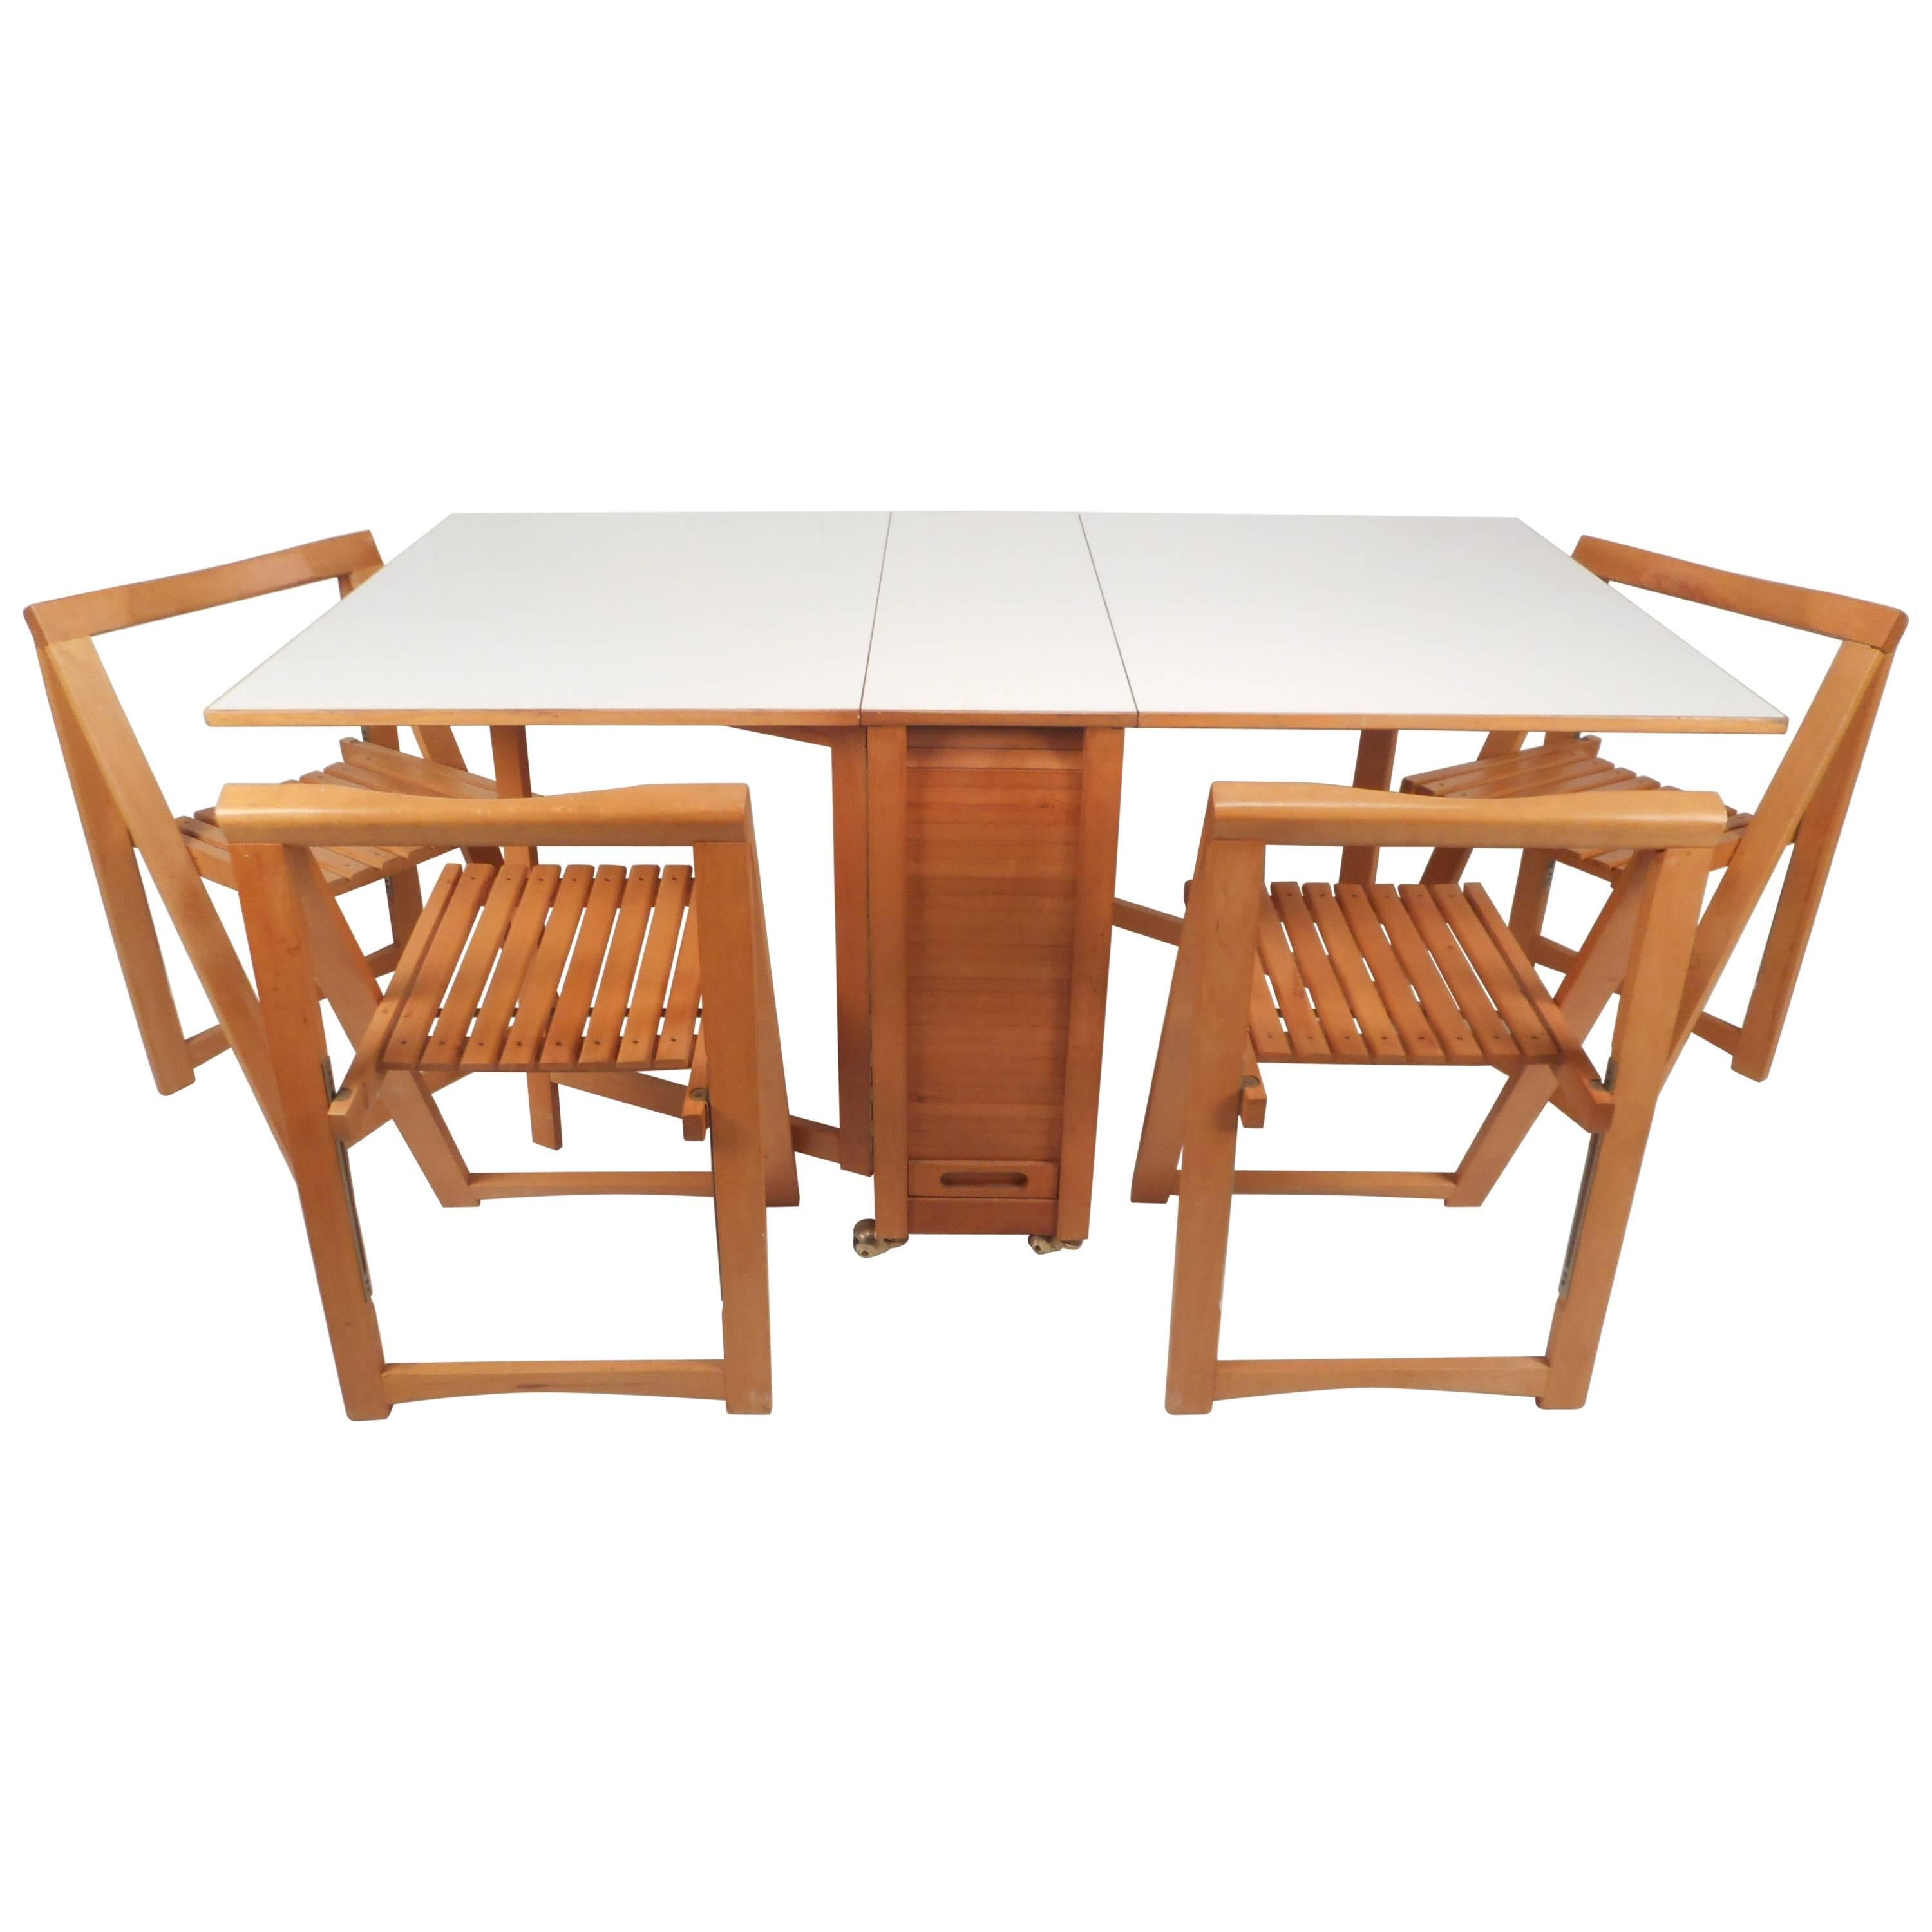 Mid-Century Modern Compact Drop-Leaf Dining Table with Chairs